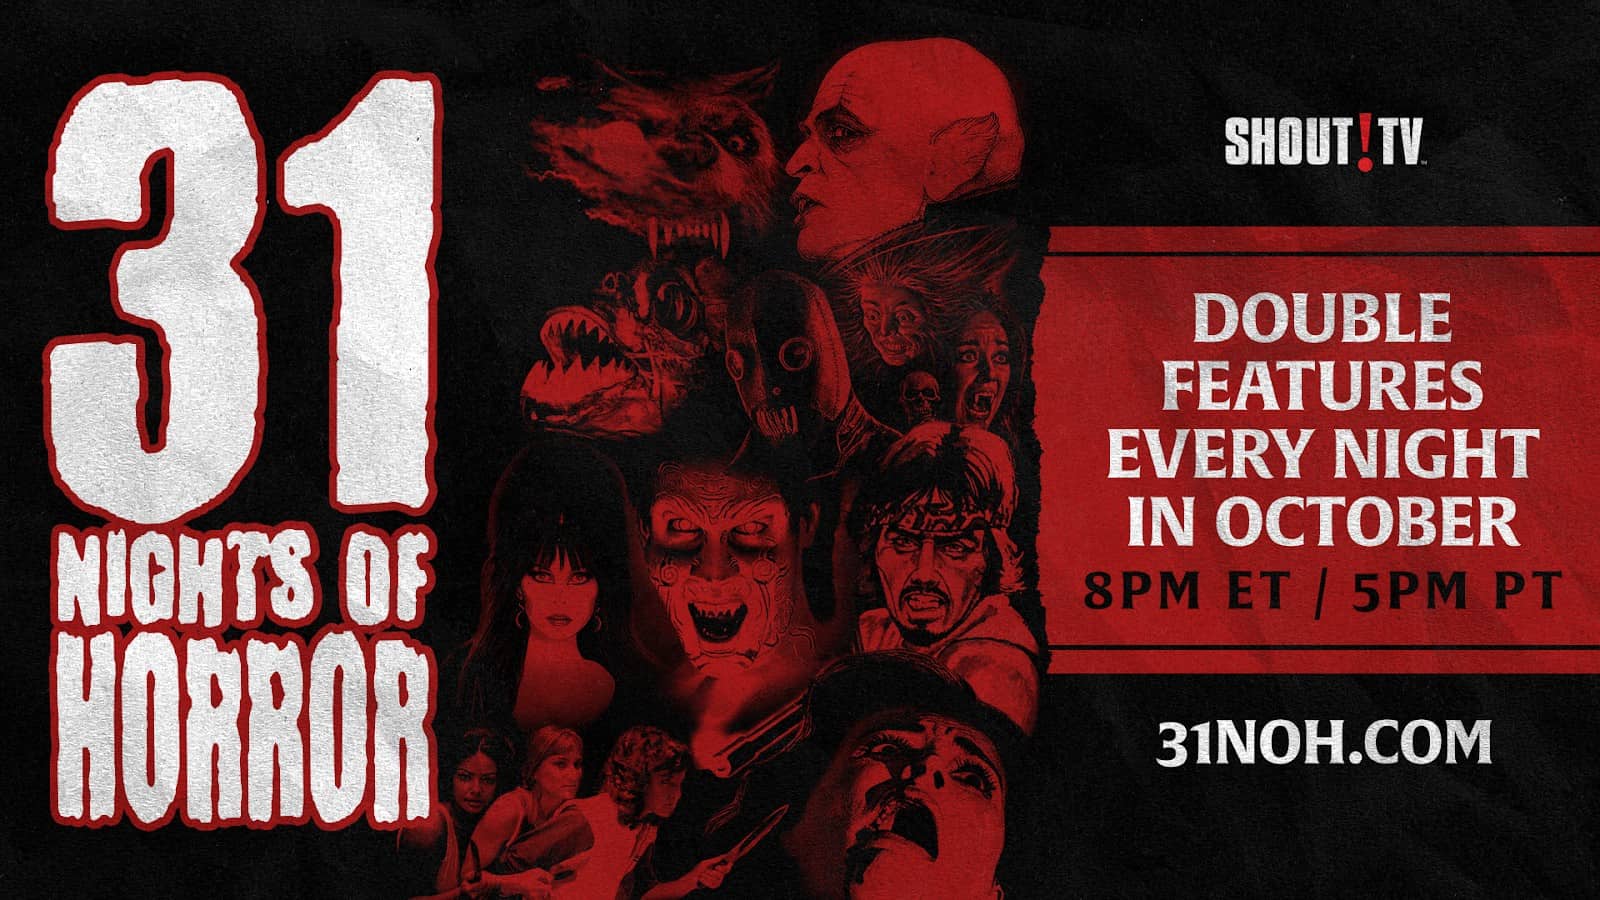 Shout! TV Unleashes 31 Nights of Horror Streaming Marathon - Check Out the Chiller Lineup 59